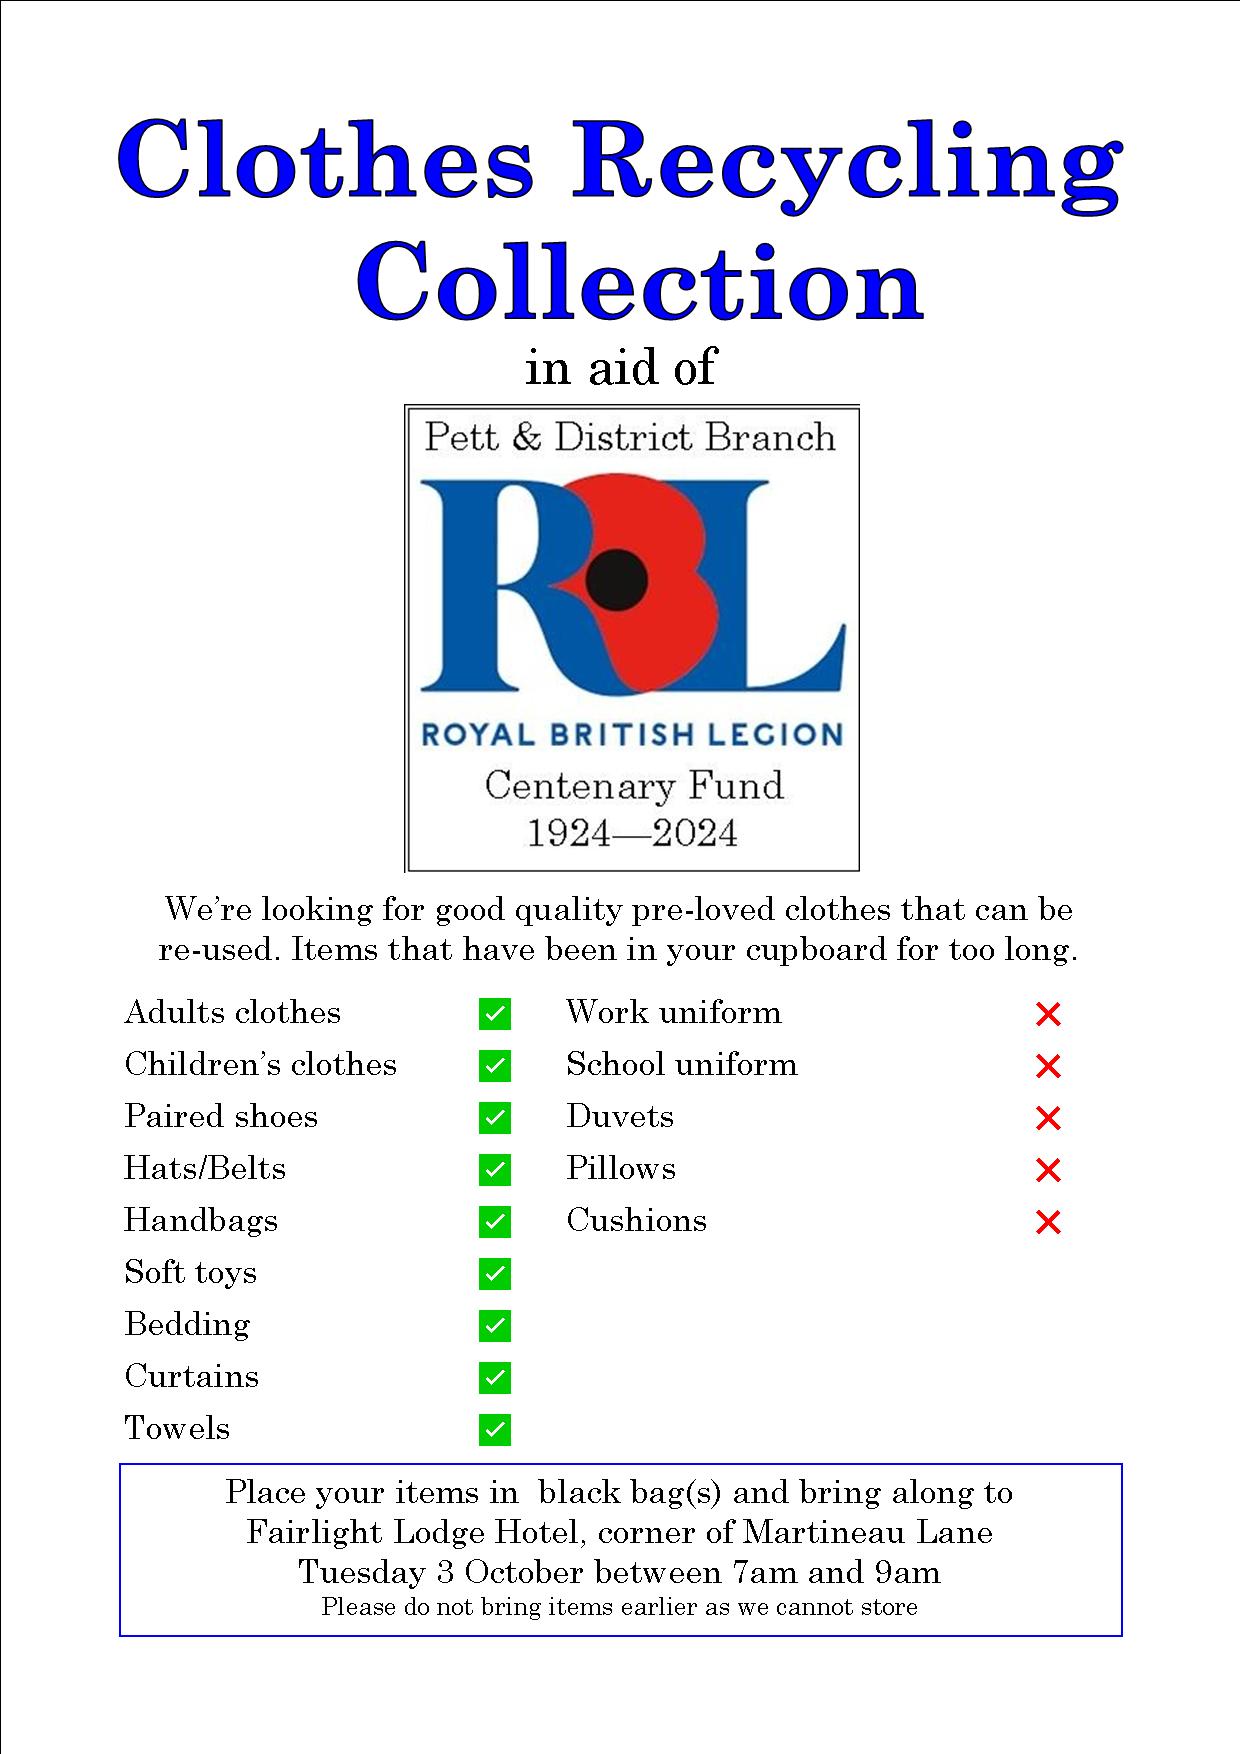 Royal British Legion Clothes Collection Tuesday 3rd October from 7am to 9am Fairlight Hotelcorner of Martineau Lane and Fairlight Road